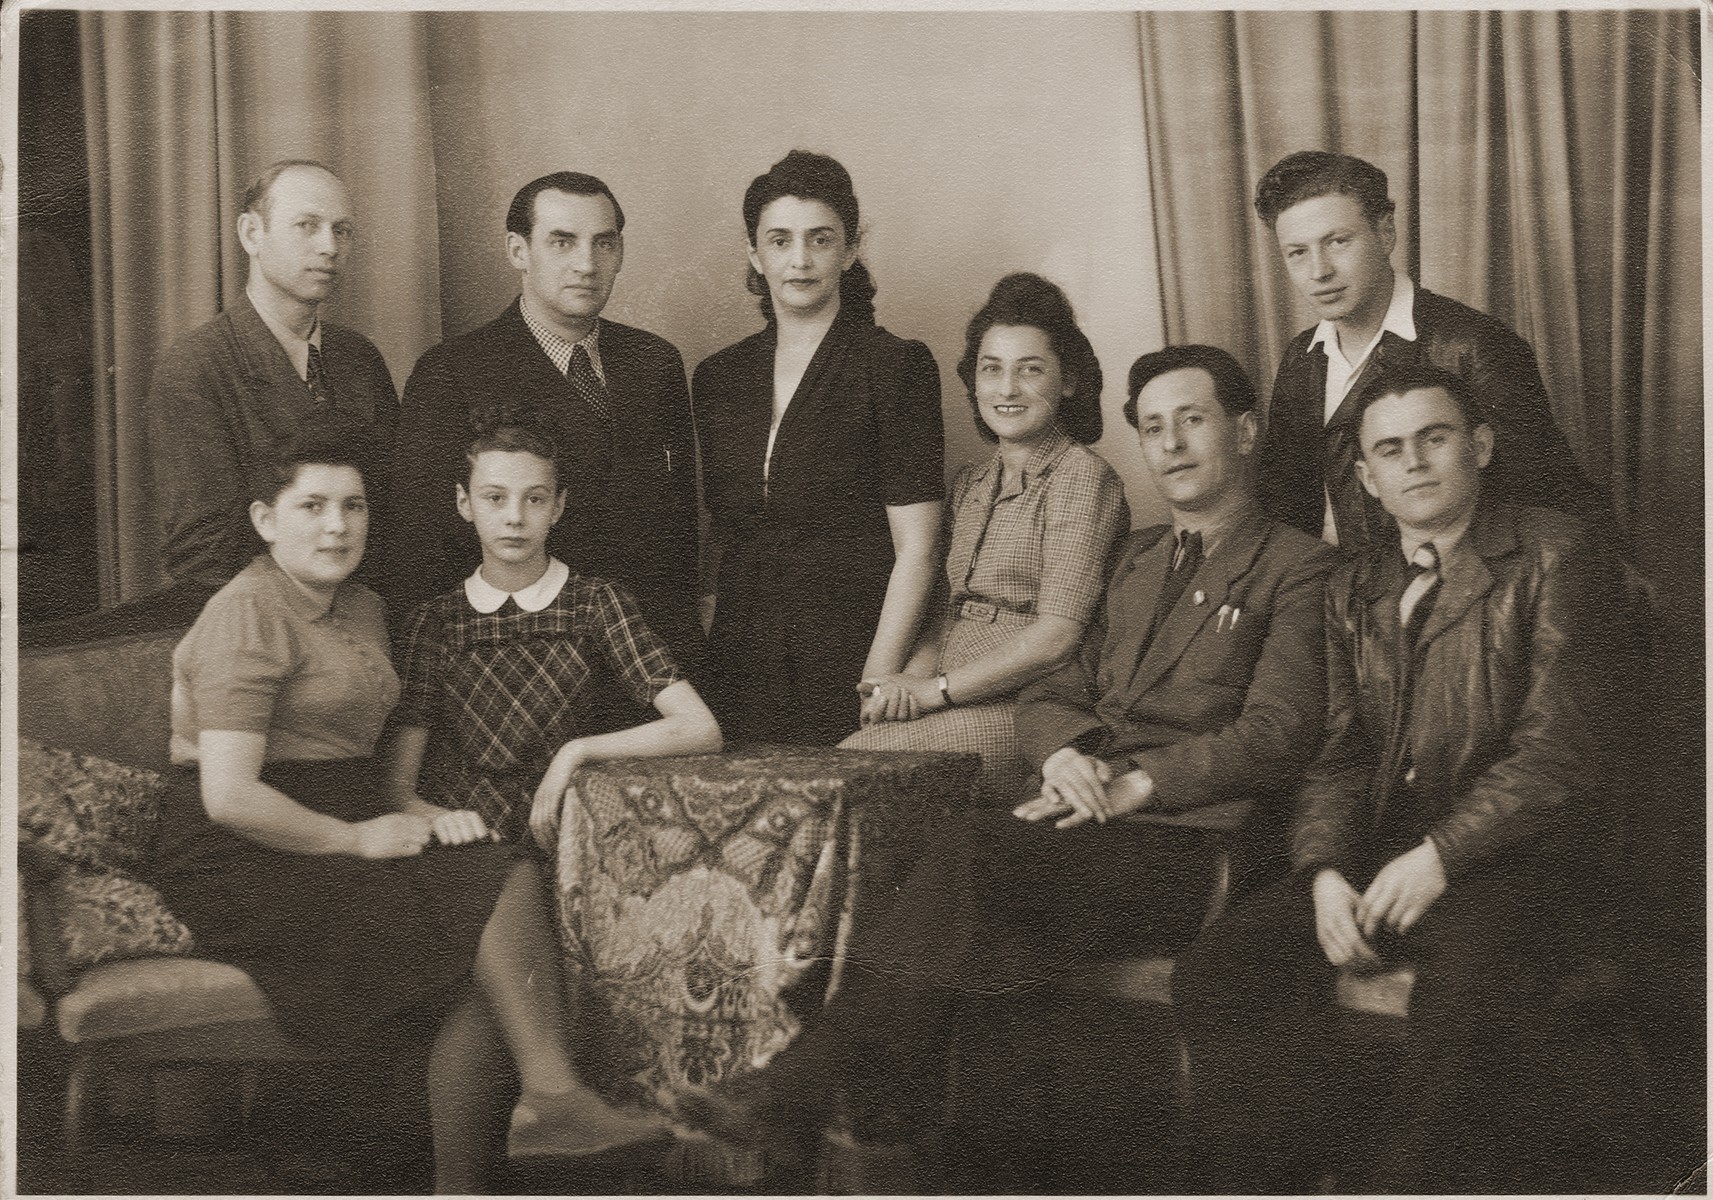 Group portrait off Jewish DPs living in the city of Bayreuth.

Among those pictured standing are Feliz Kozywoda (William's uncle, second from the left) and Welek Luksenburg (right).  Seated (second from the left, the daughter of Moniek Merin) is Helinka Merin, standing in the center is Maryska Gancwiach (the first wife of Moniek Merin).